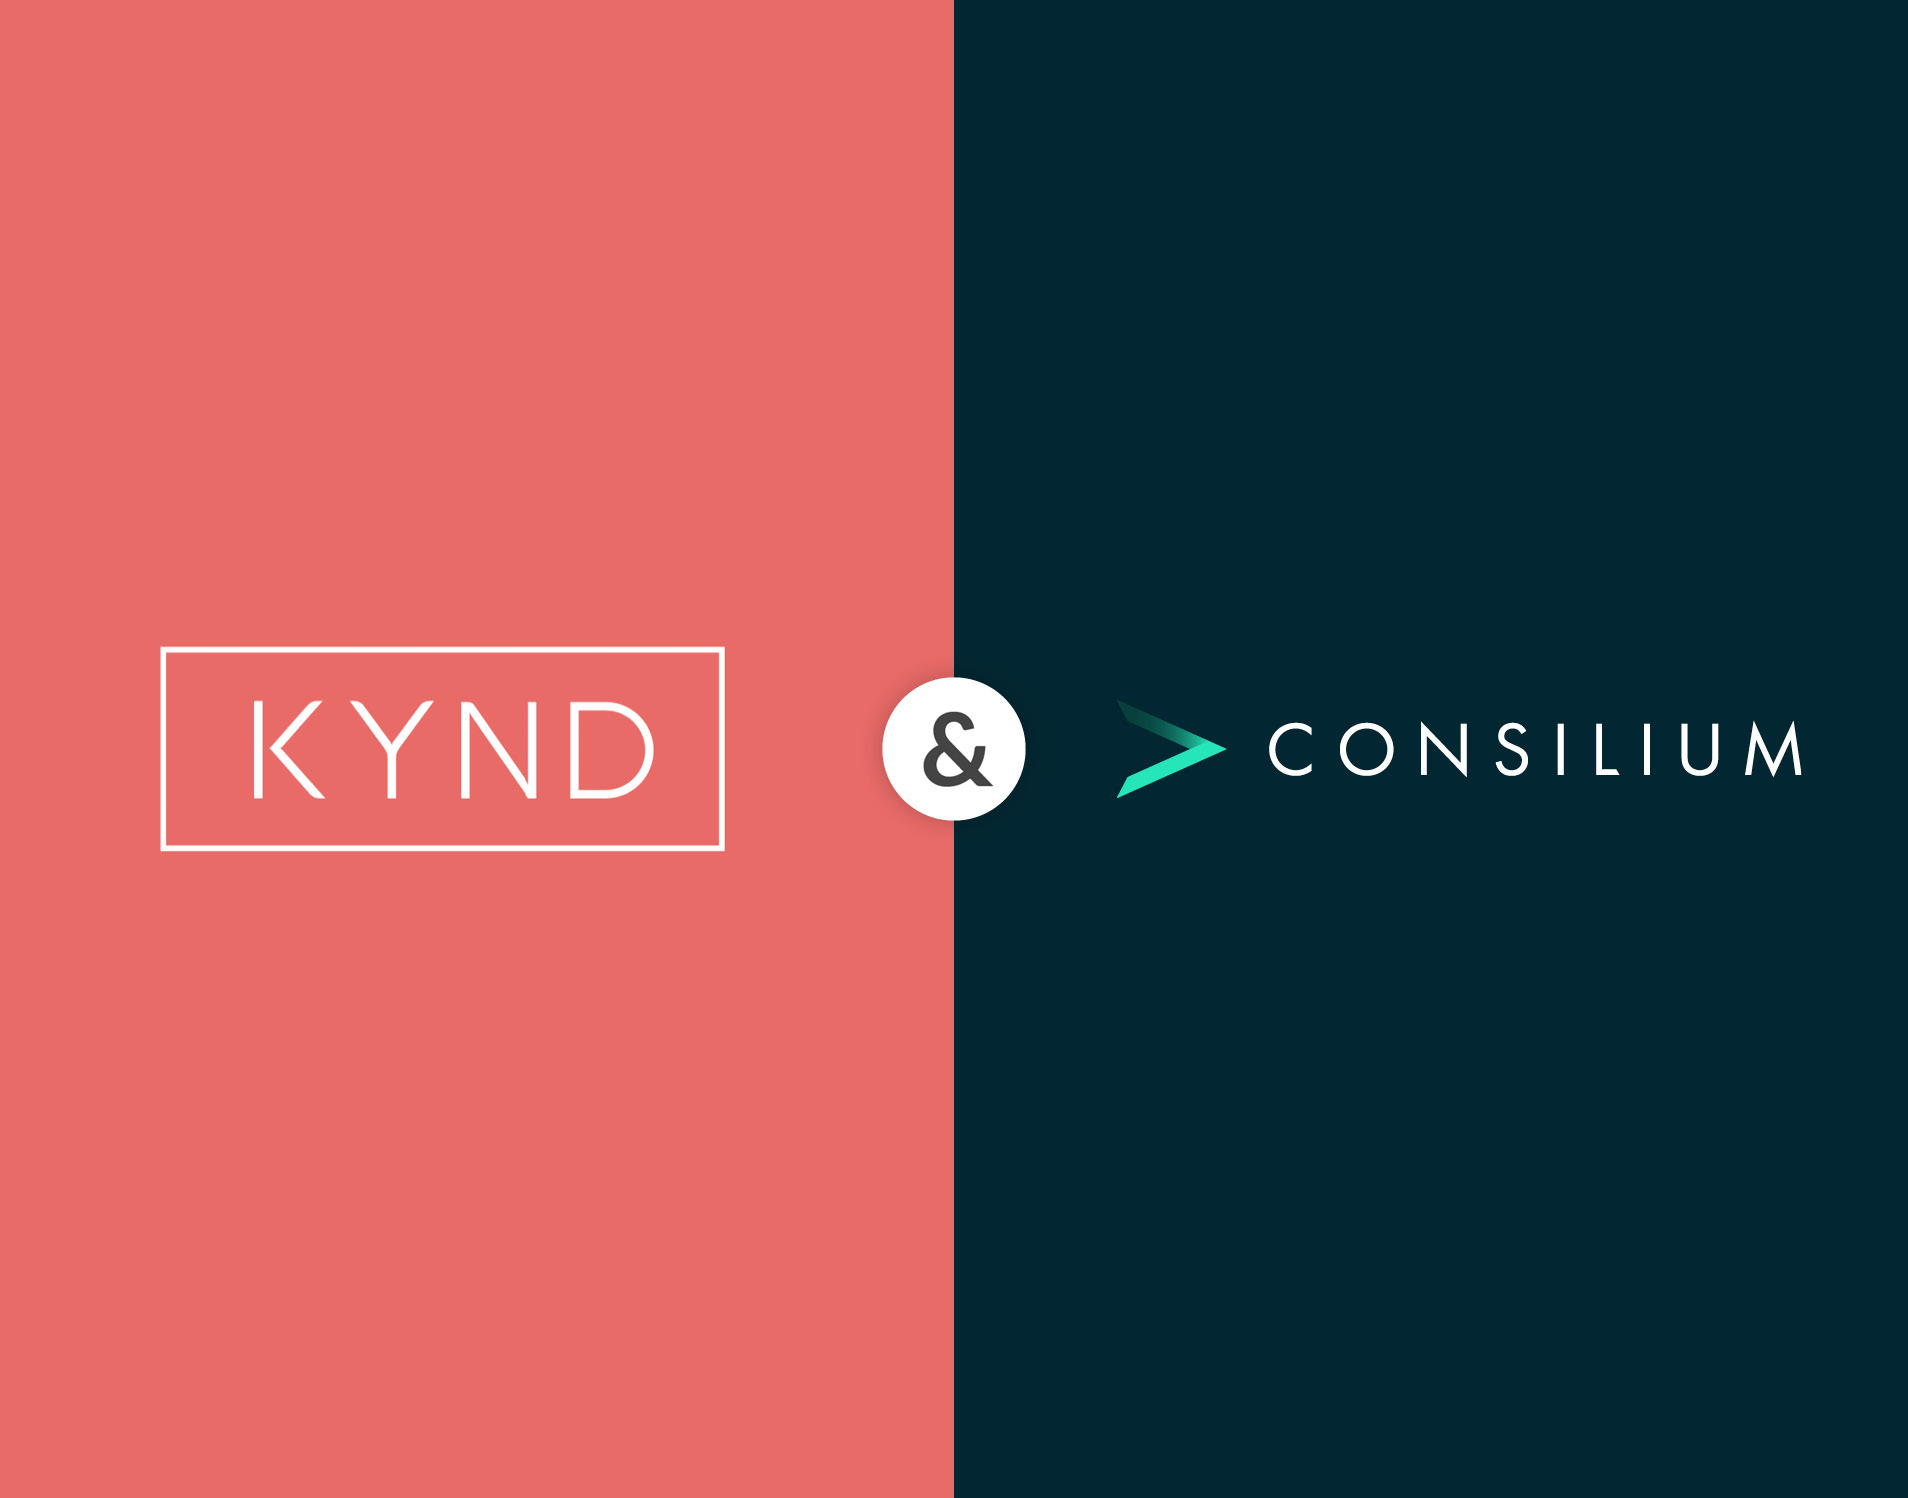 Consilium partners with KYND to fuel cyber growth through unrivalled risk intelligence